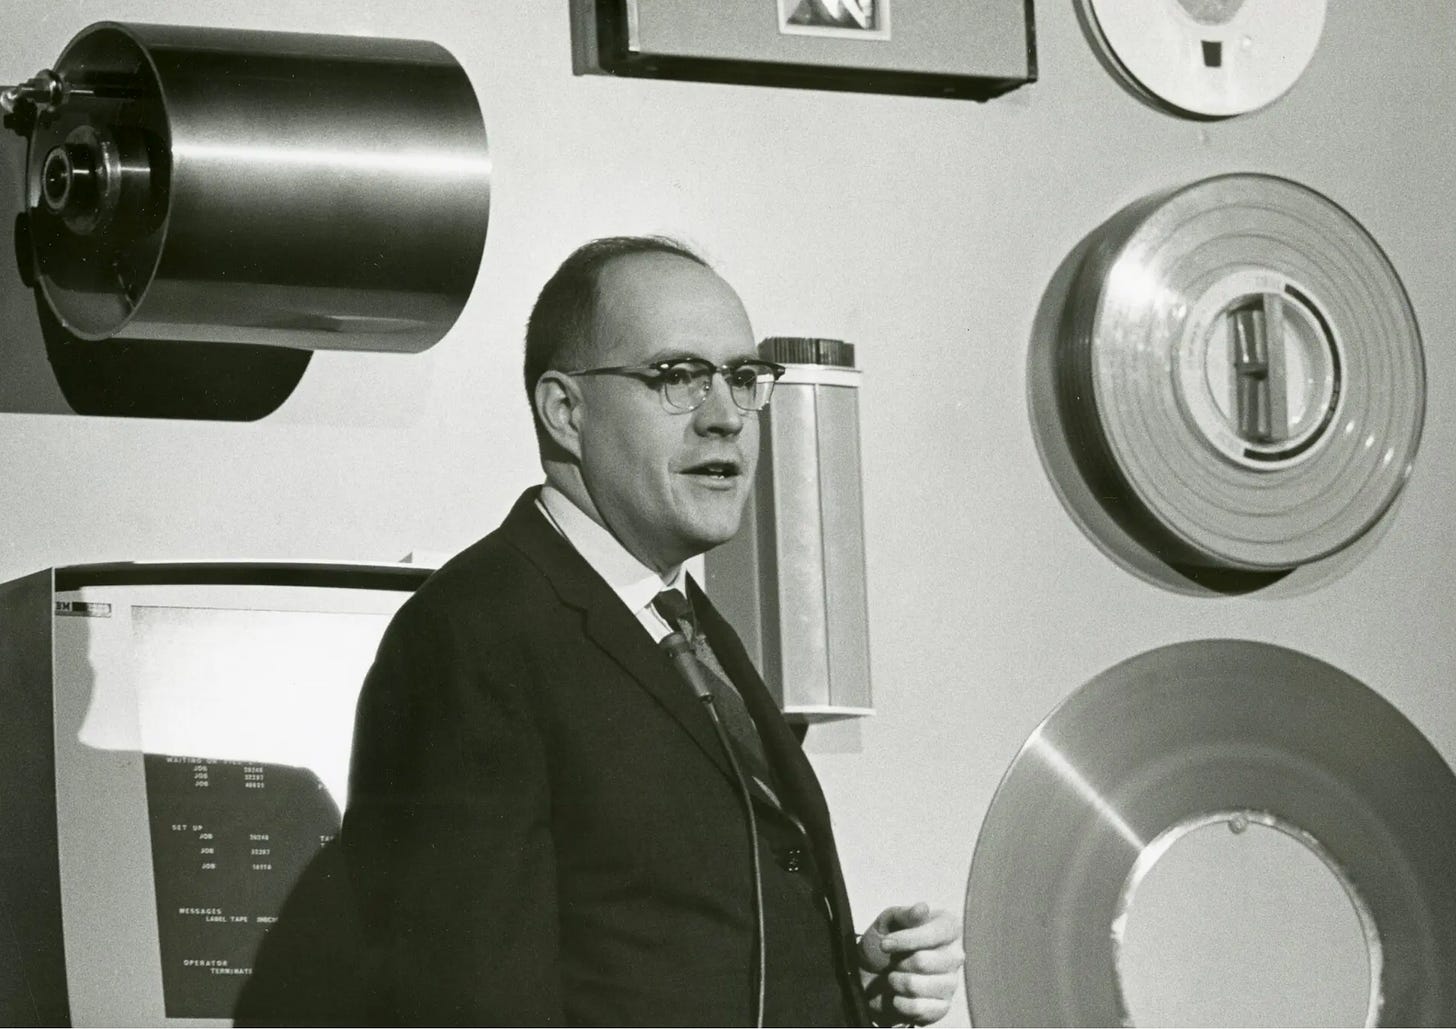 Black and white photo from the 1960s of a man in a suit delivering a speech with a background of then vintage computer components. 